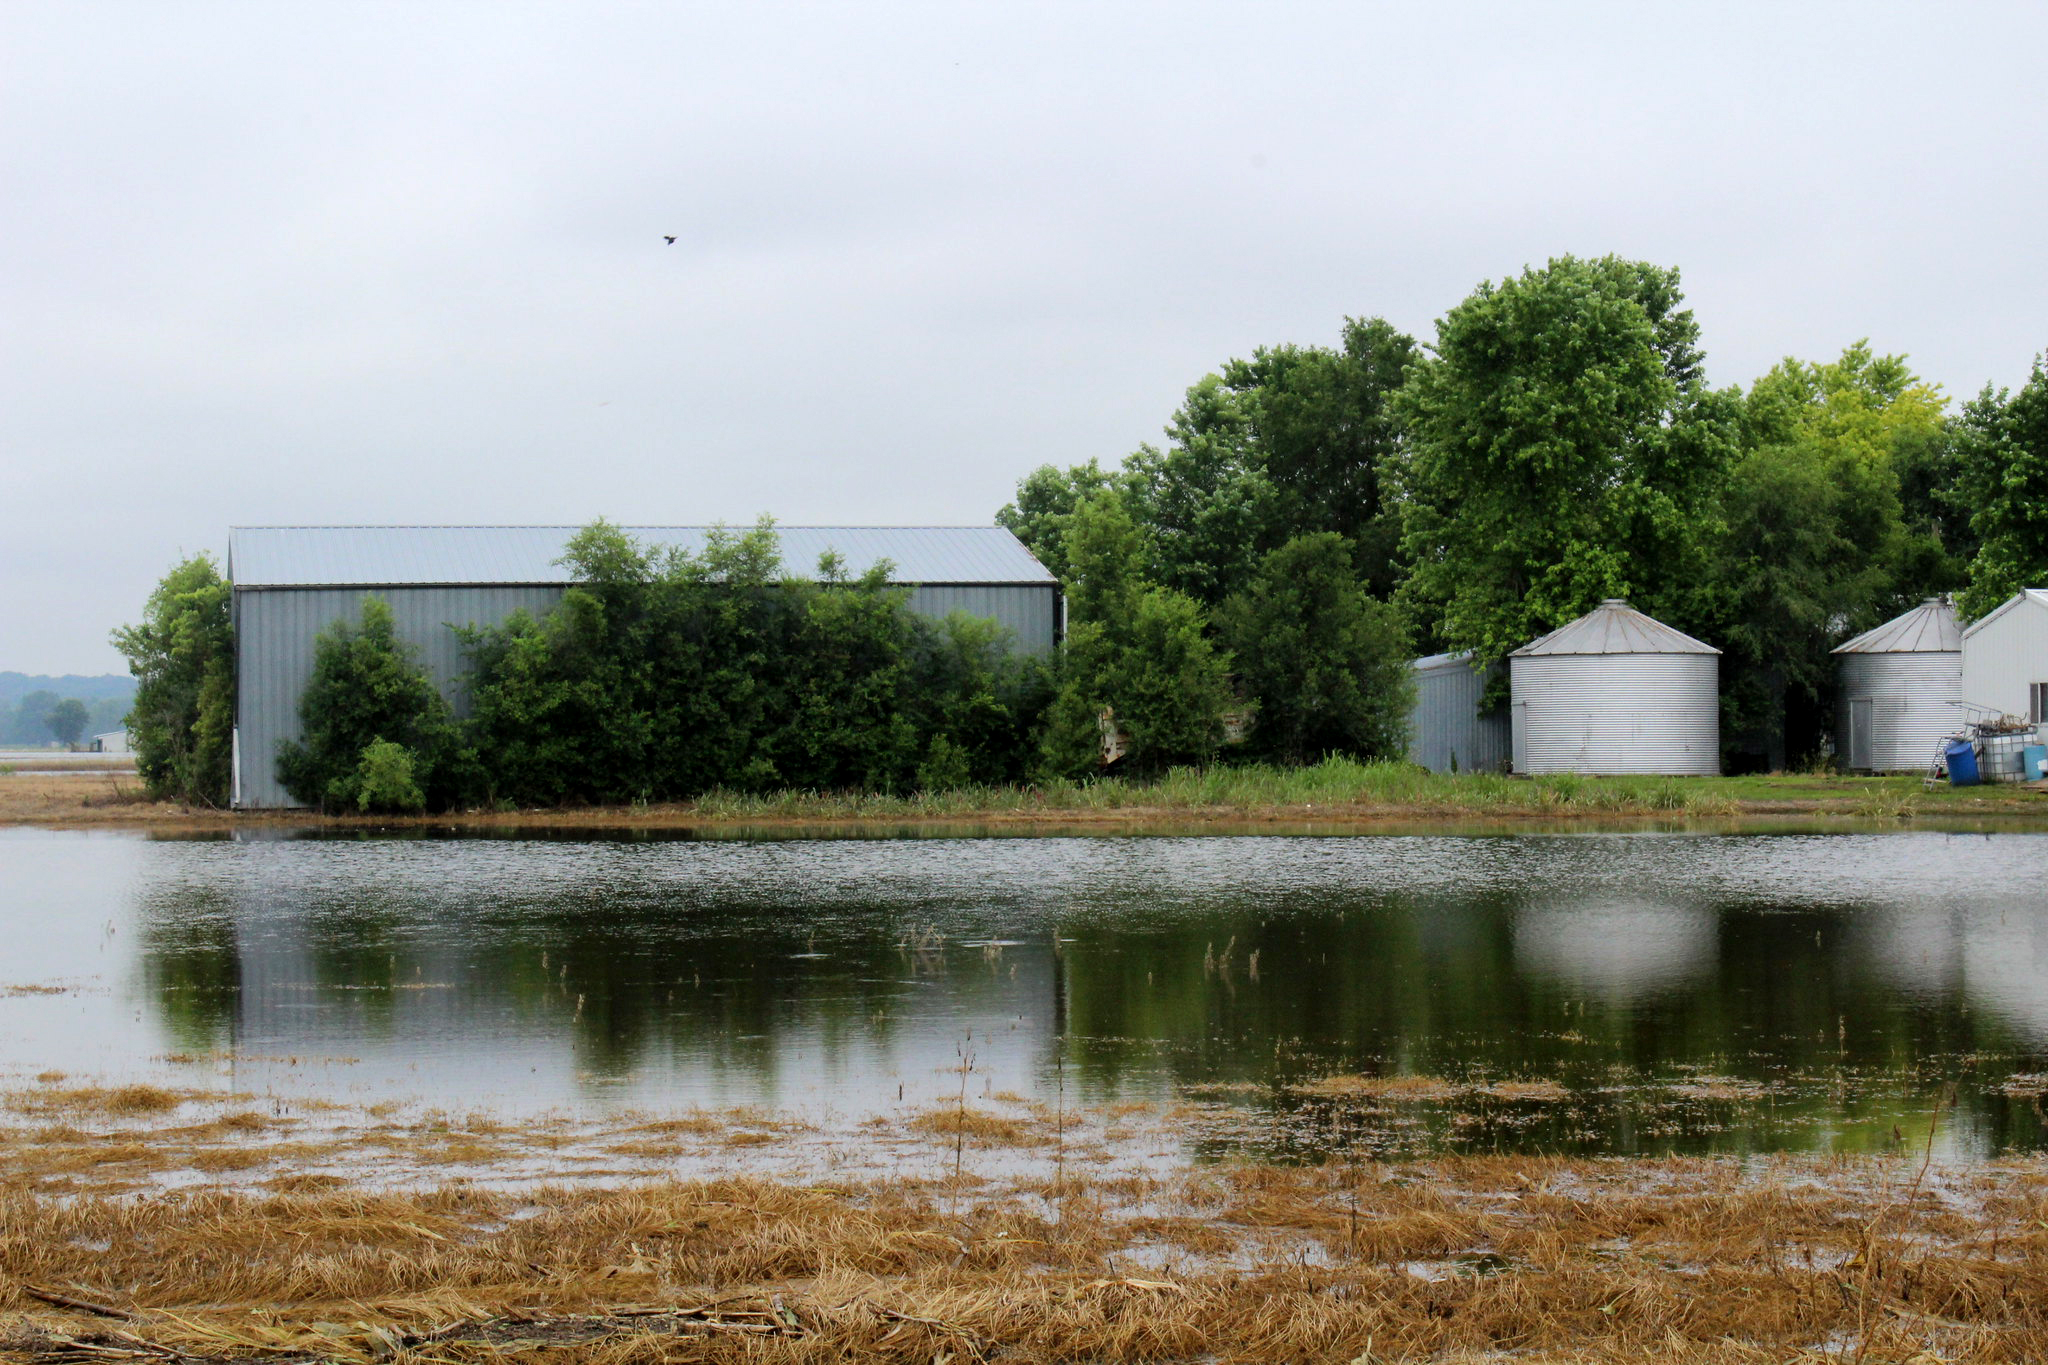 Open In this 2019 file photo, flooding in crop fields leaves behind debris and submerged plants that may die or suffer yield damage. This year, abundant rainfall threatens late-planted crops in much of Missouri. Photo by Linda Geist.